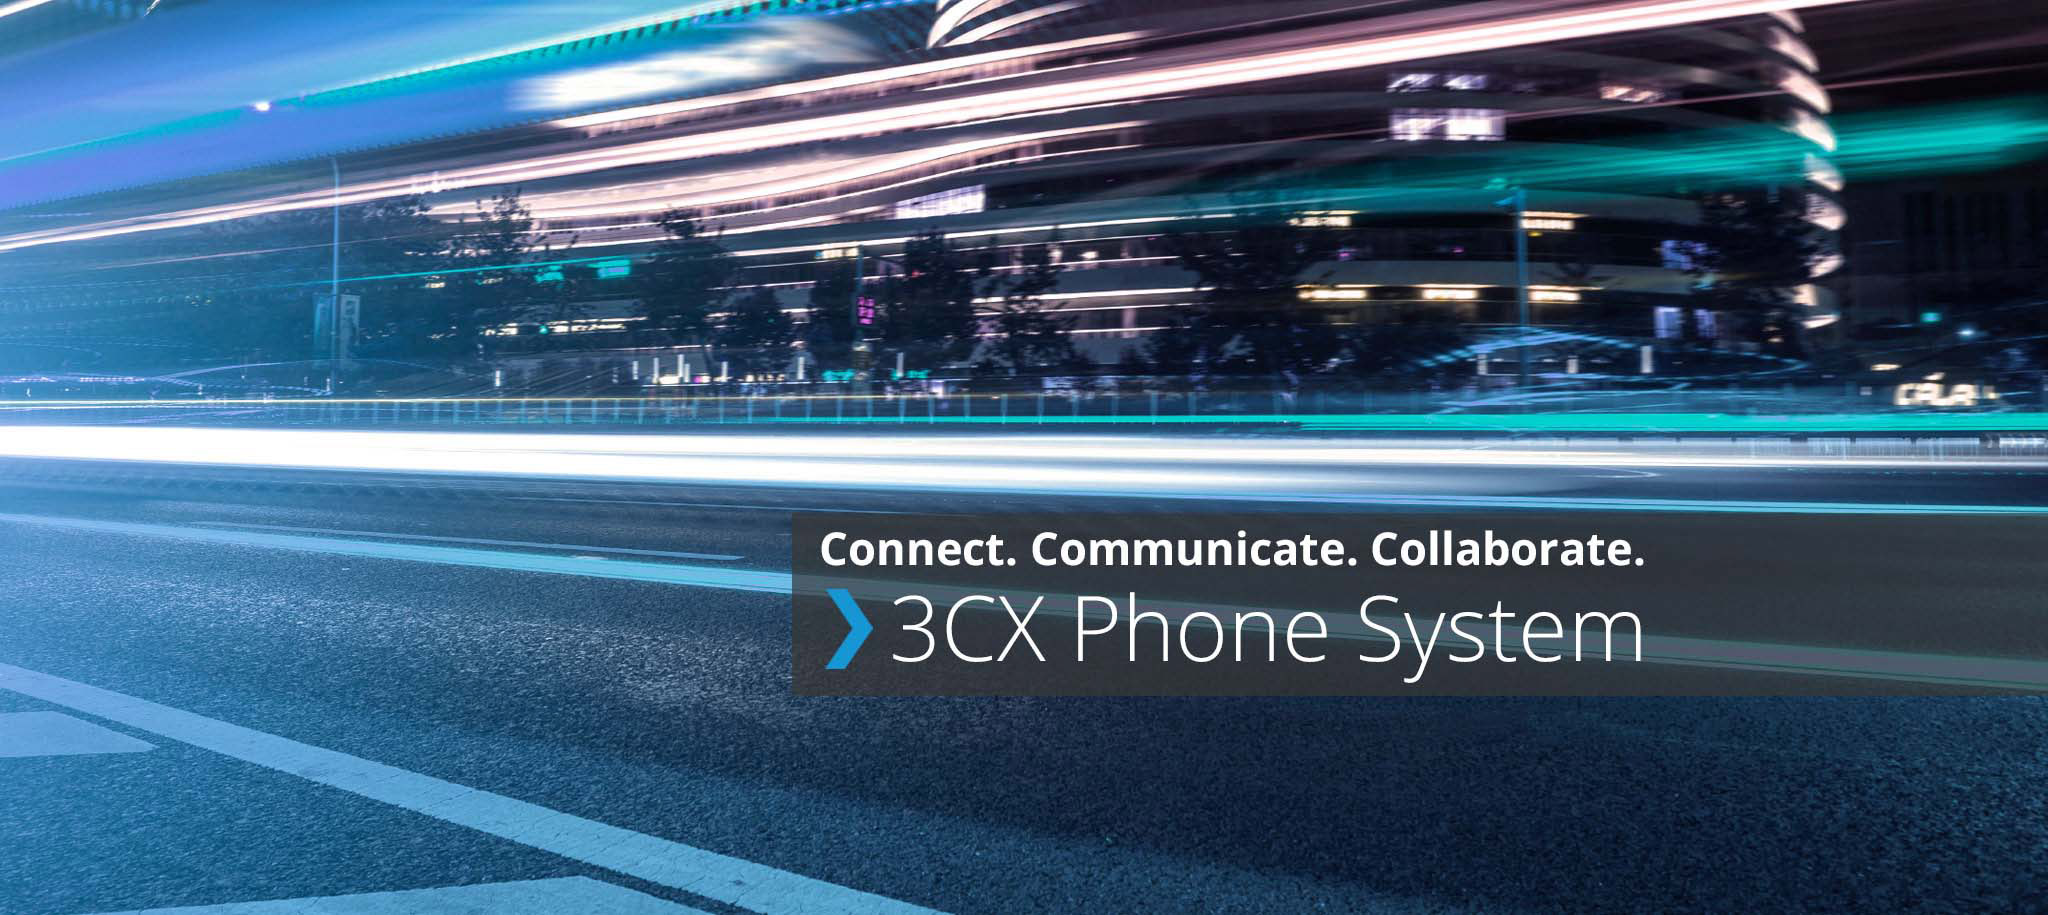 3CX Unified Communications Services - VoIP